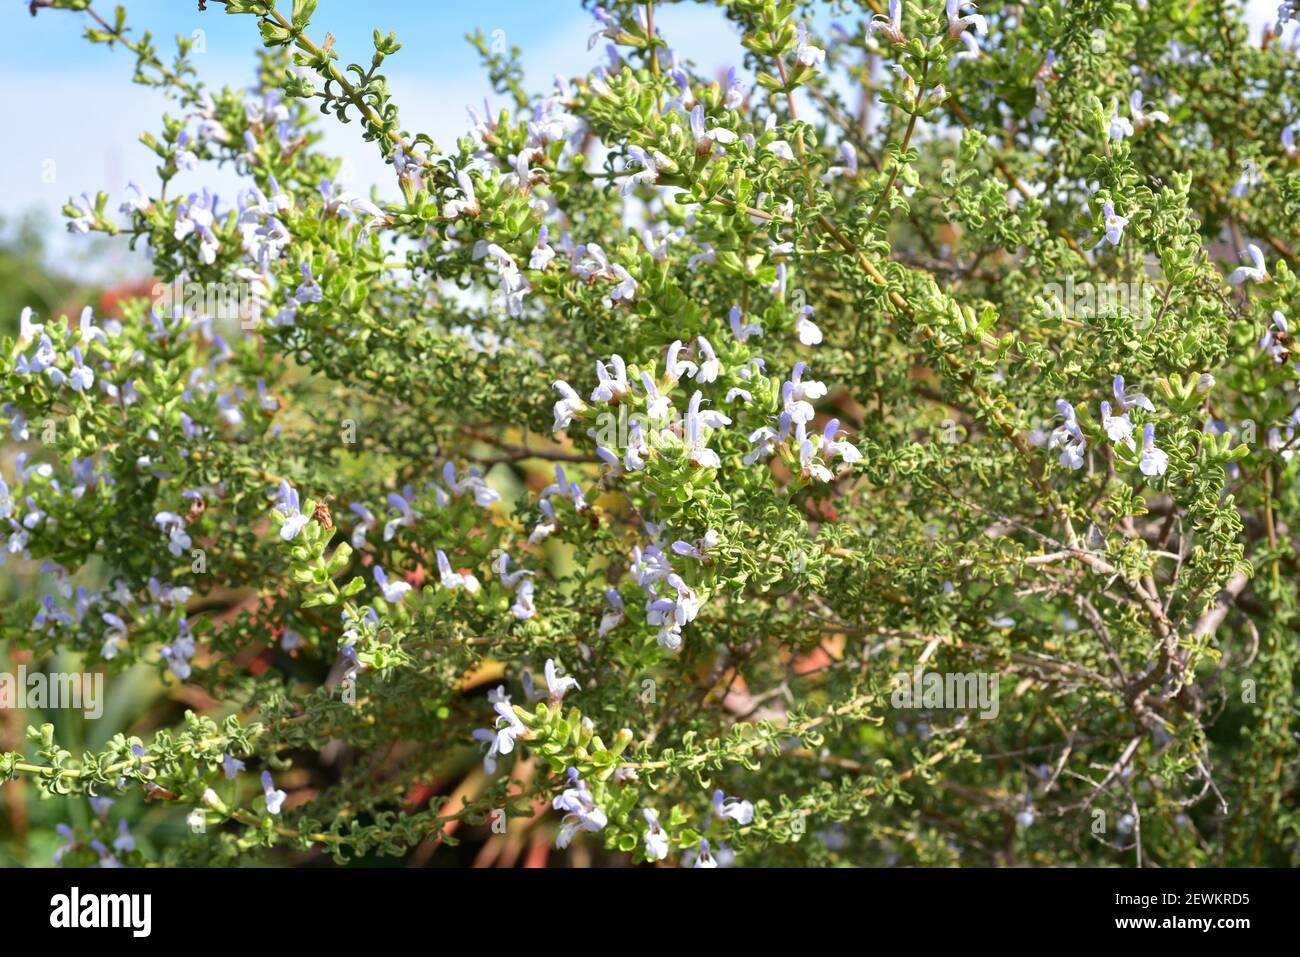 Toothed sage (Salvia dentata) is an evergreen shrub native to South Africa. Flowers and leaves detail. Stock Photo